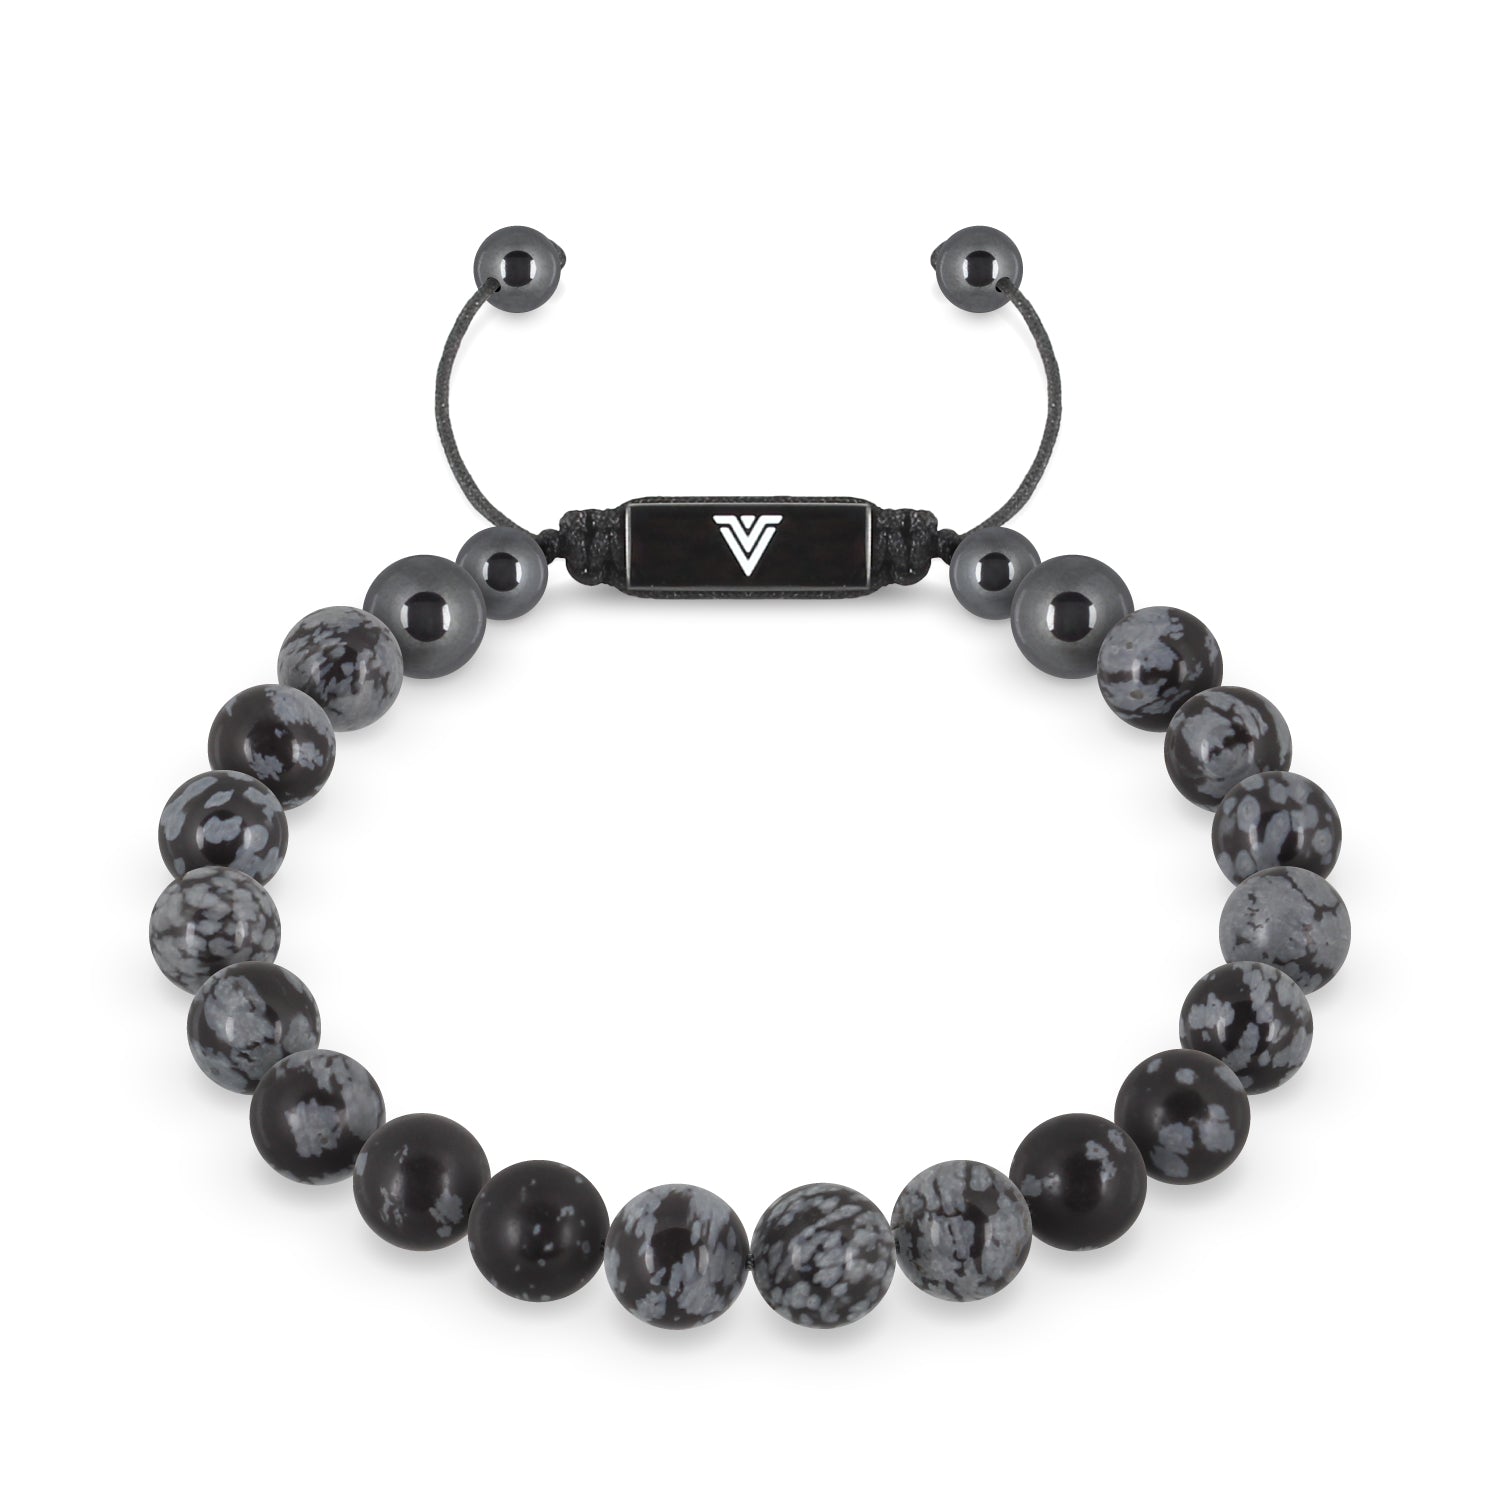 Front view of an 8mm Snowflake Obsidian crystal beaded shamballa bracelet with black stainless steel logo bead made by Voltlin